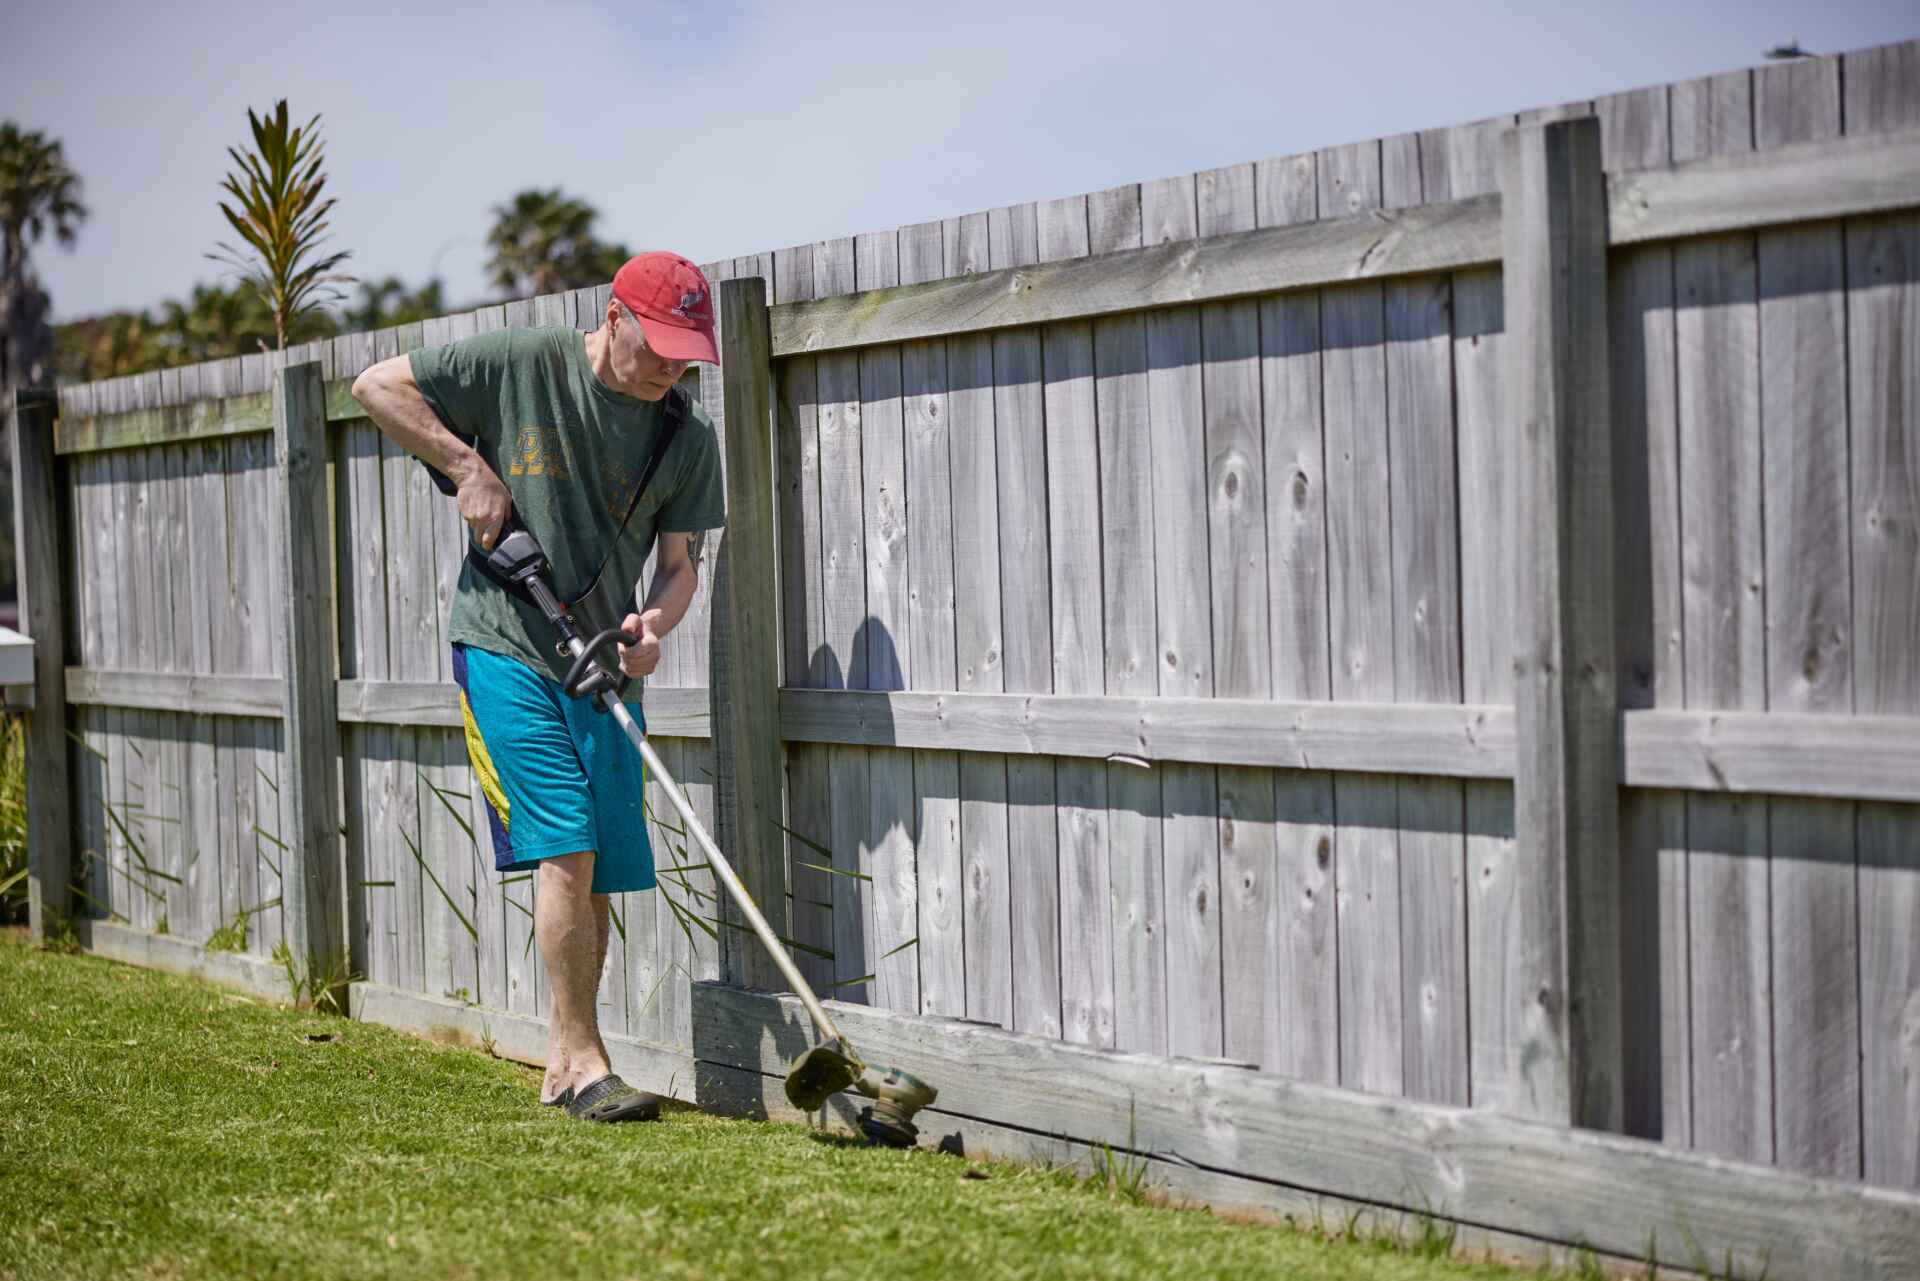 Man using whipper snipper against timber fence. Treated pine fence plinth is placed at the bottom of the fence palings to create a smooth edge to cut the grass against without damaging the fence